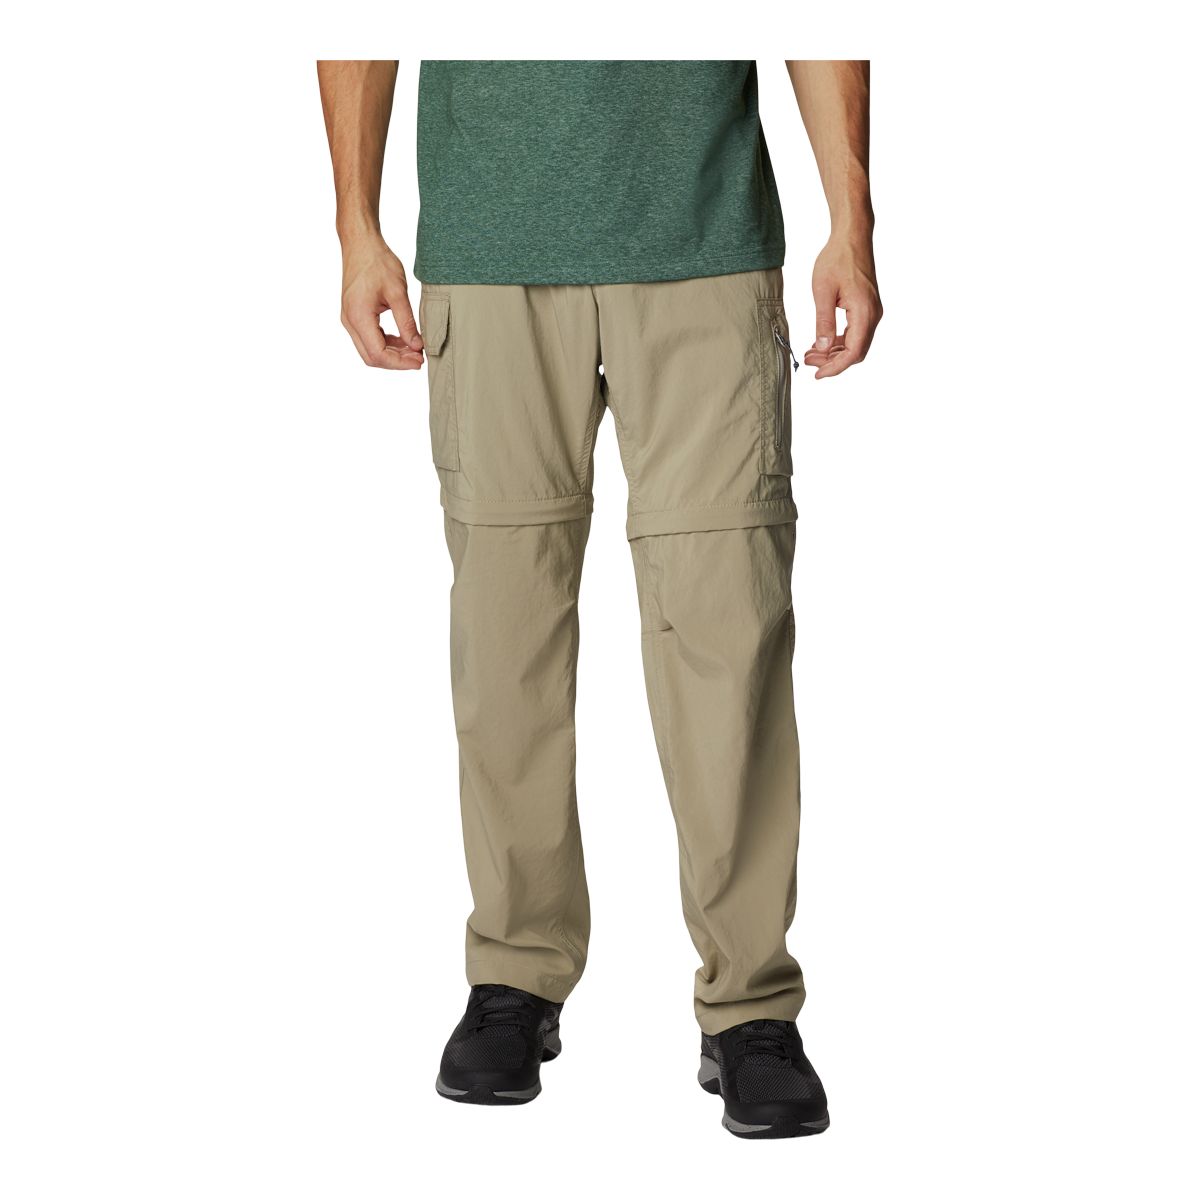  Columbia Men's Backcast Convertible Pant, City Grey, Small x 32  : Clothing, Shoes & Jewelry